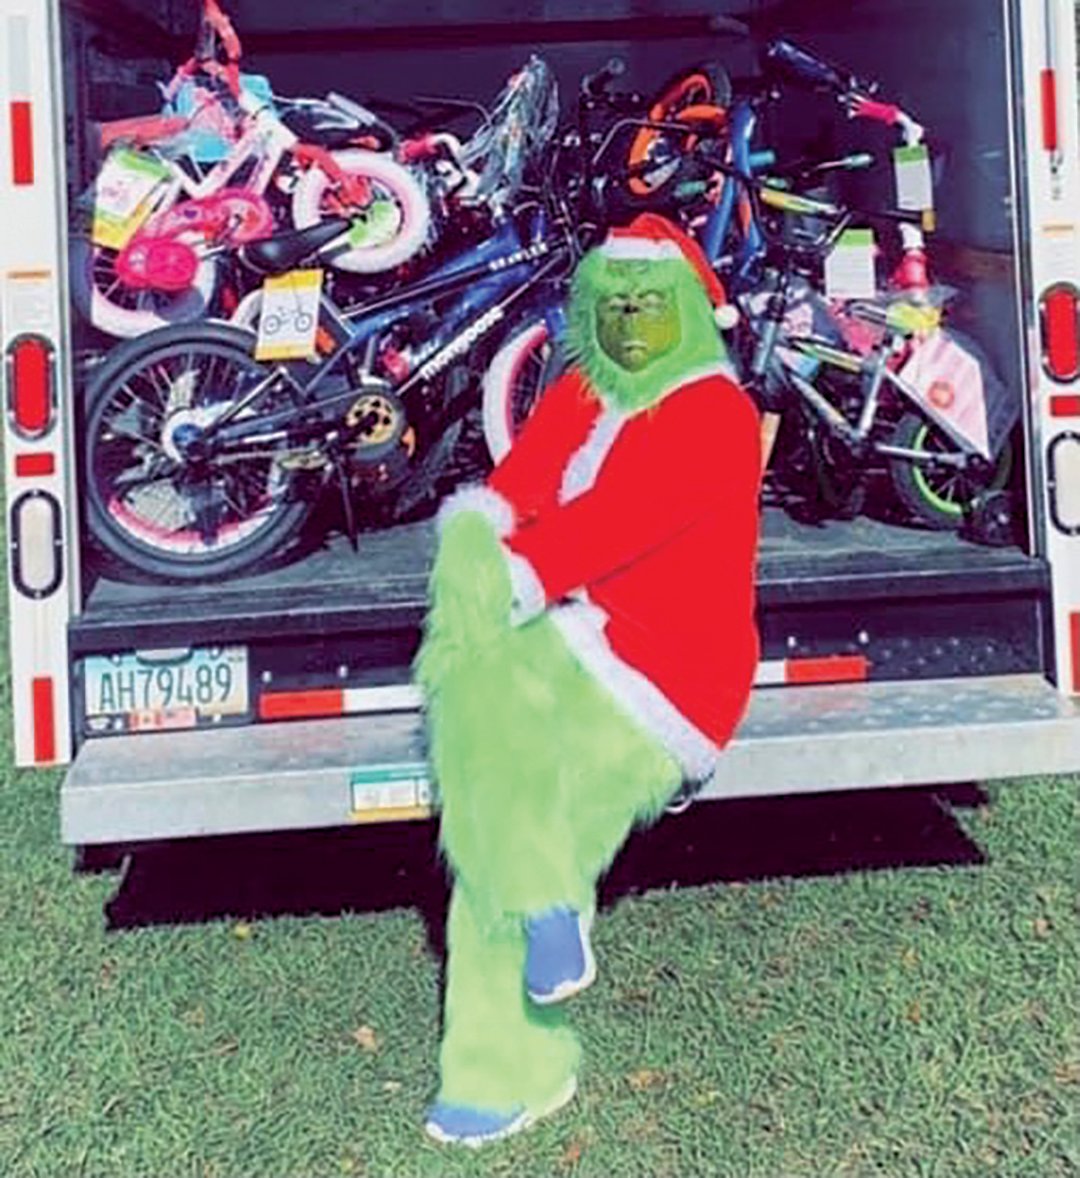 The Grinch sits and waits to distribute bicycles to local children on Christmas Eve.